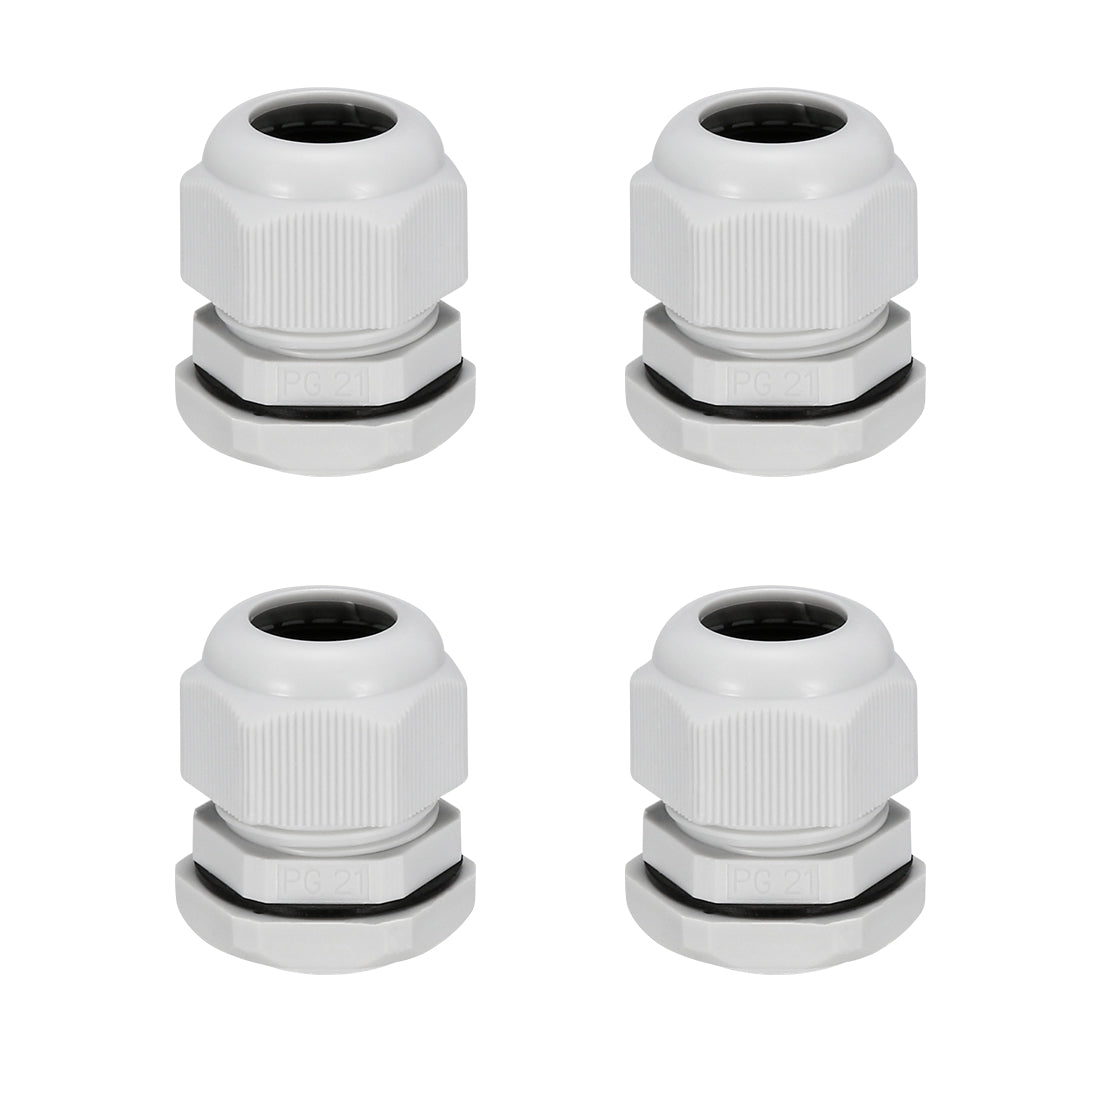 uxcell Uxcell 4Pcs PG21 Cable Gland Waterproof Connector Plastic Wire Glands Joints White for 13-18mm Dia Wires